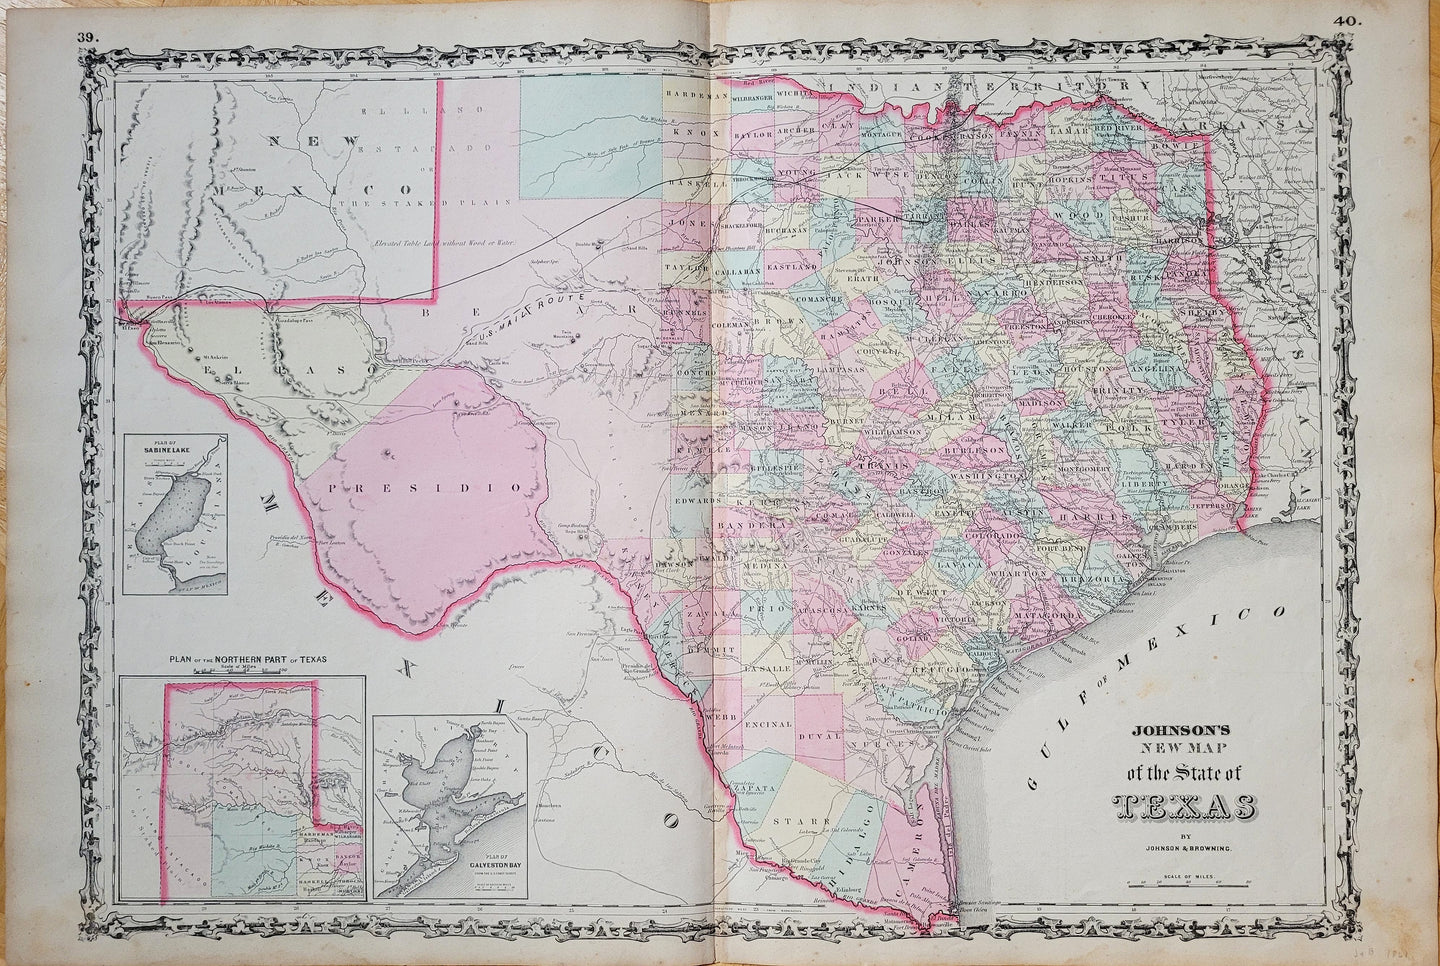 1861 - Johnson's New Map of the State of Texas - Antique Map